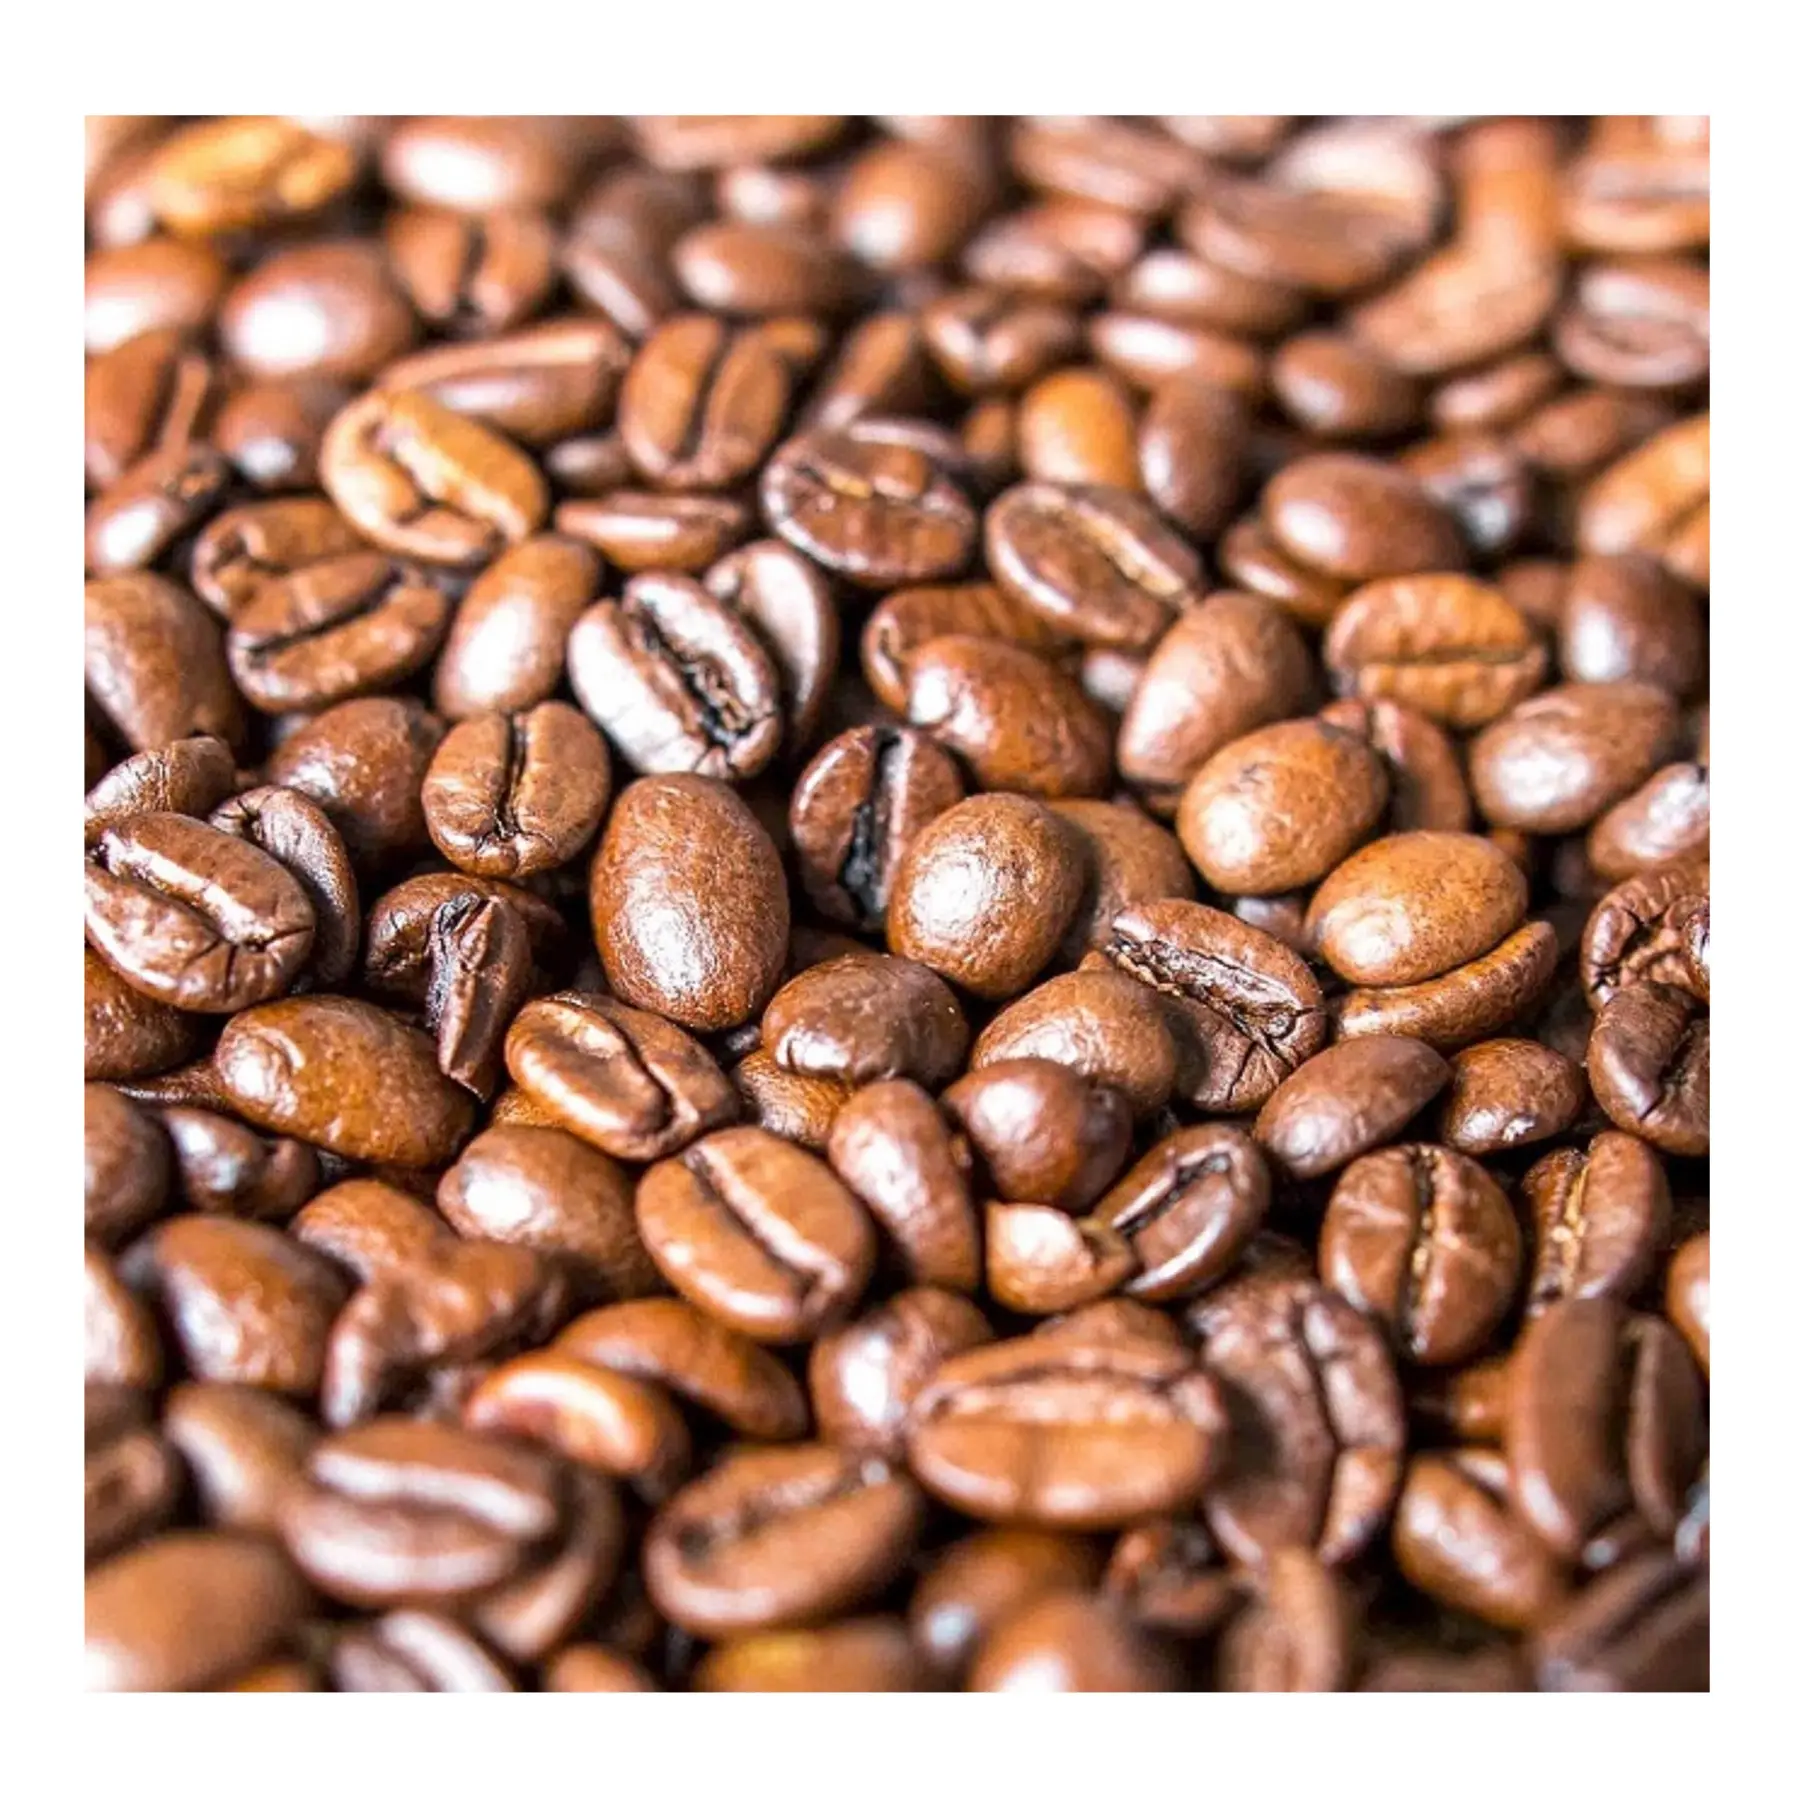 TOP QUALITY ROASTED COFFEE BEANS AT WHOLESALE PRICE